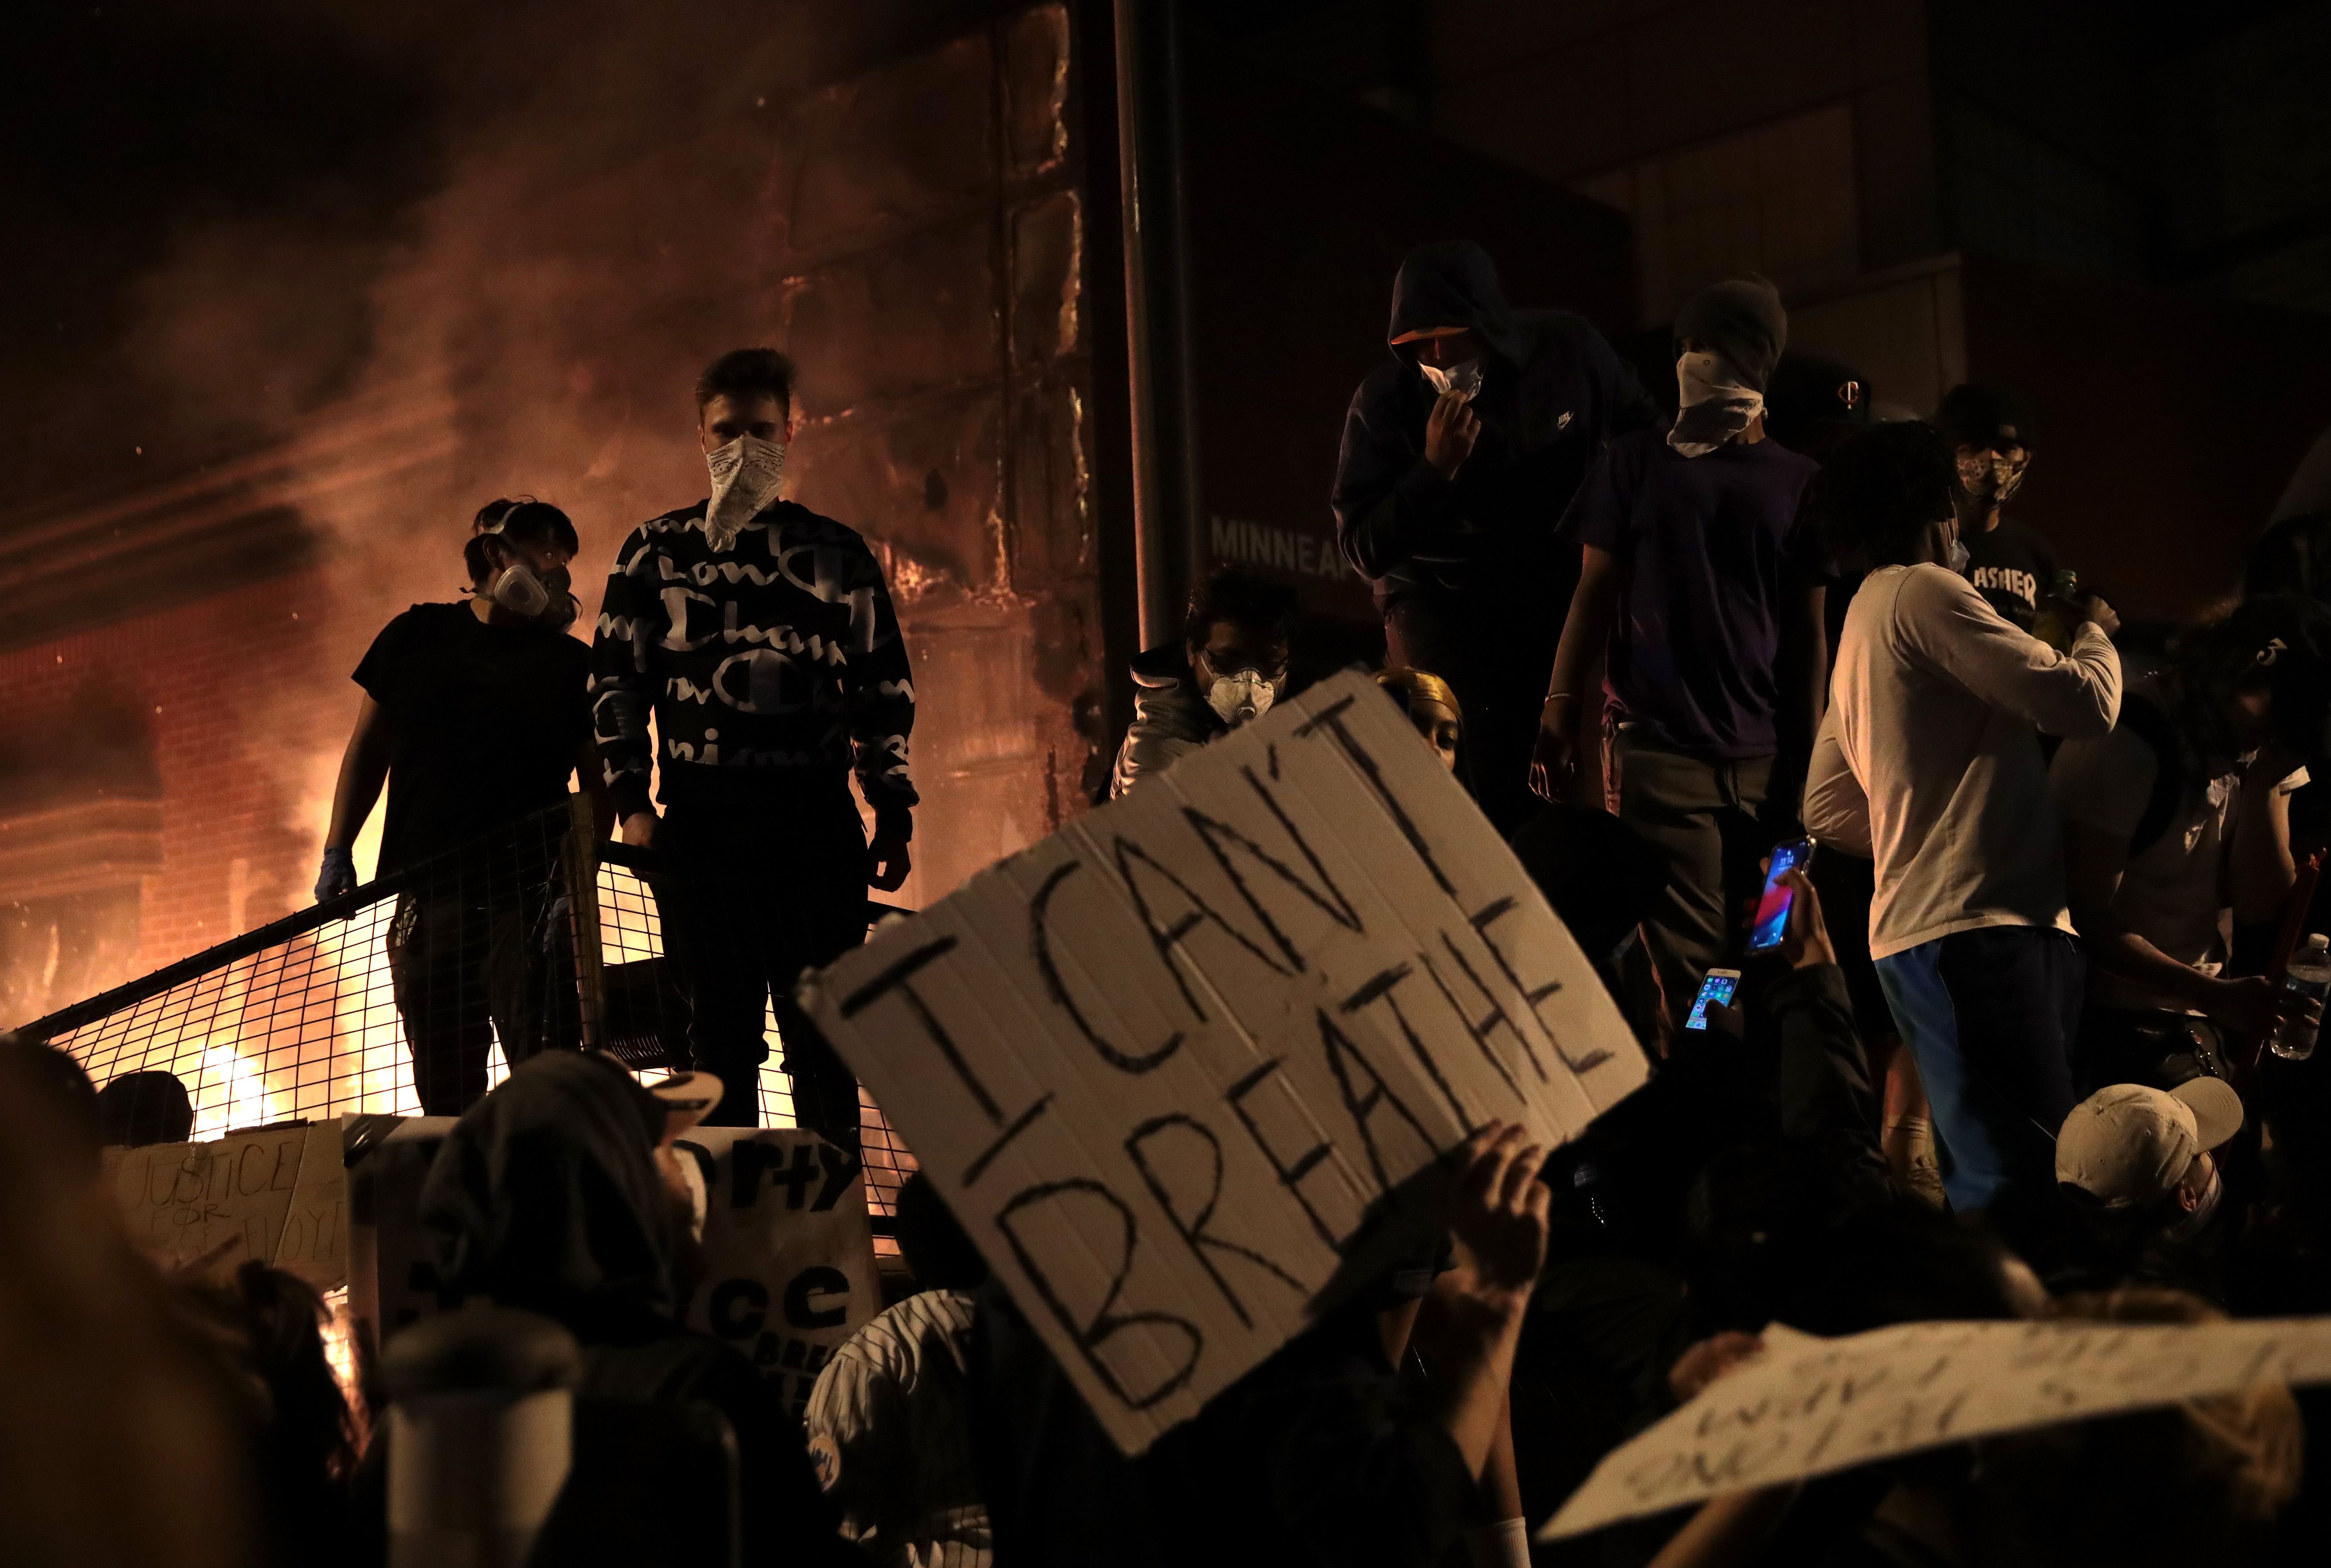 Protesters stand in front of the 3rd precinct police building as it burns during a protest on May 28